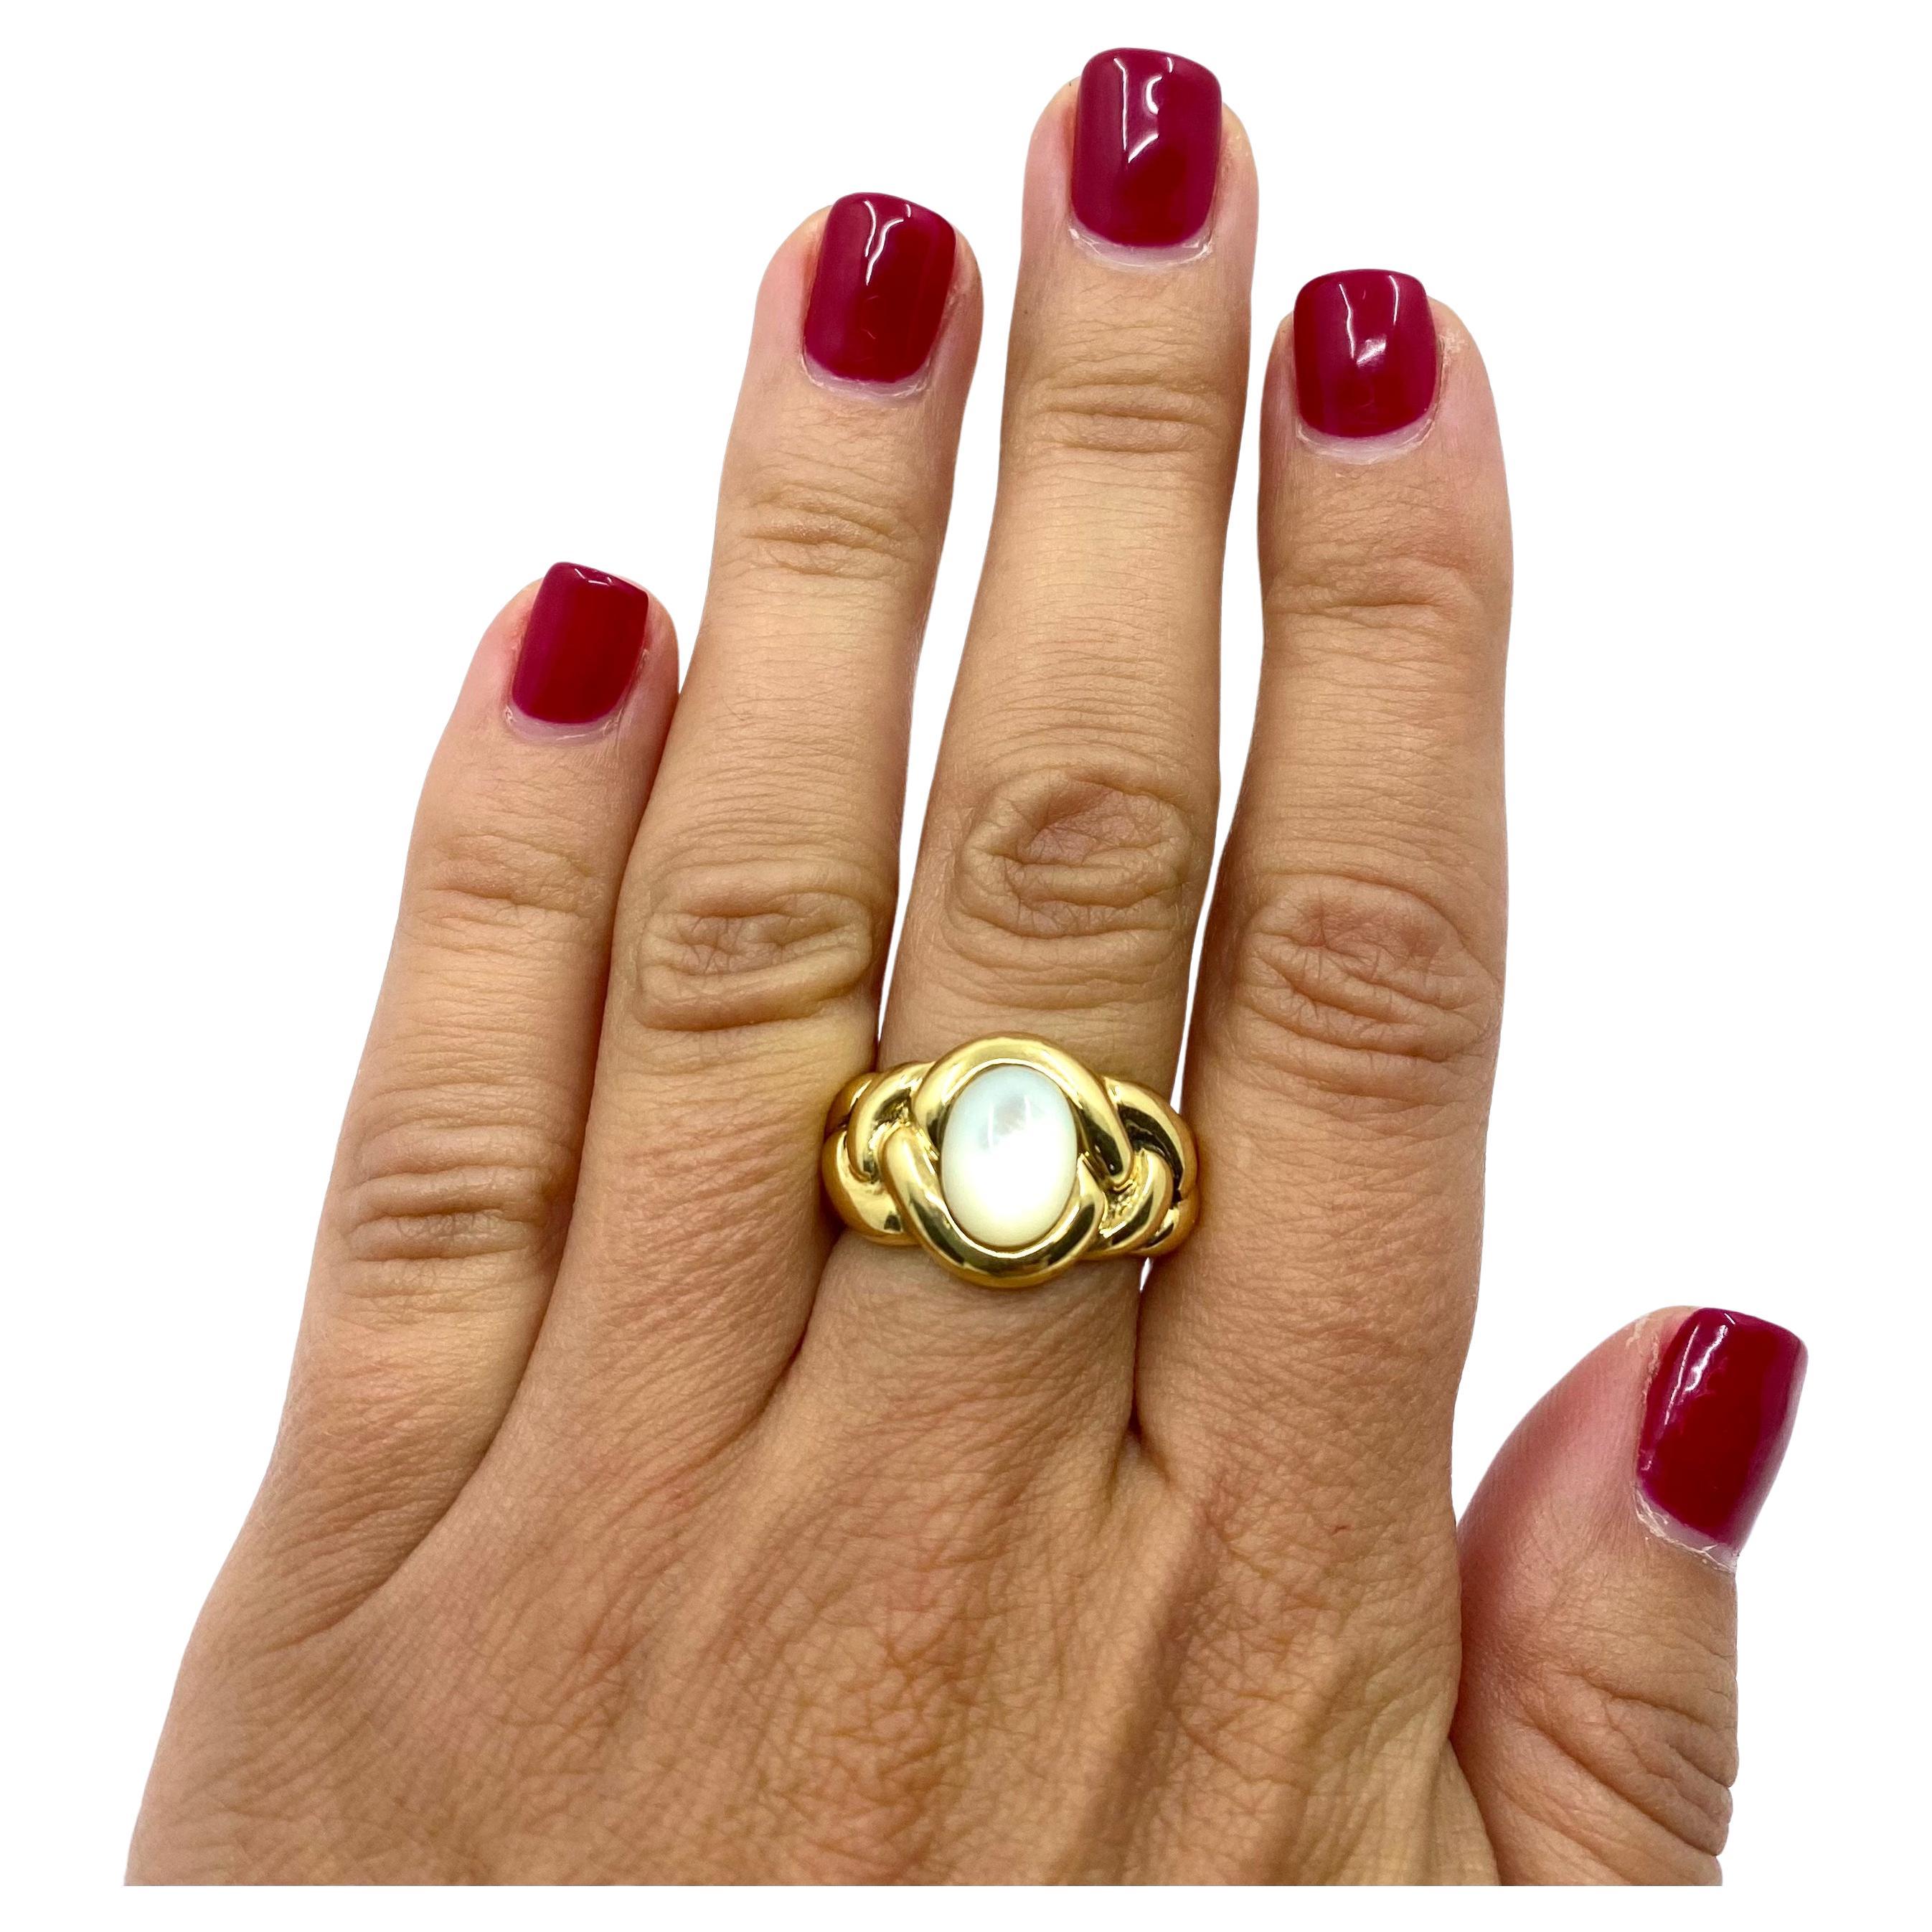 A beautiful vintage ring by Van Cleef & Arpels made of 18k gold and mother of pearl. The ring is designed as a braded shank that frames the oval cabochon cut mother-of-pearl. This VCA ring’s design is sensual and feminine. The smooth lines of the